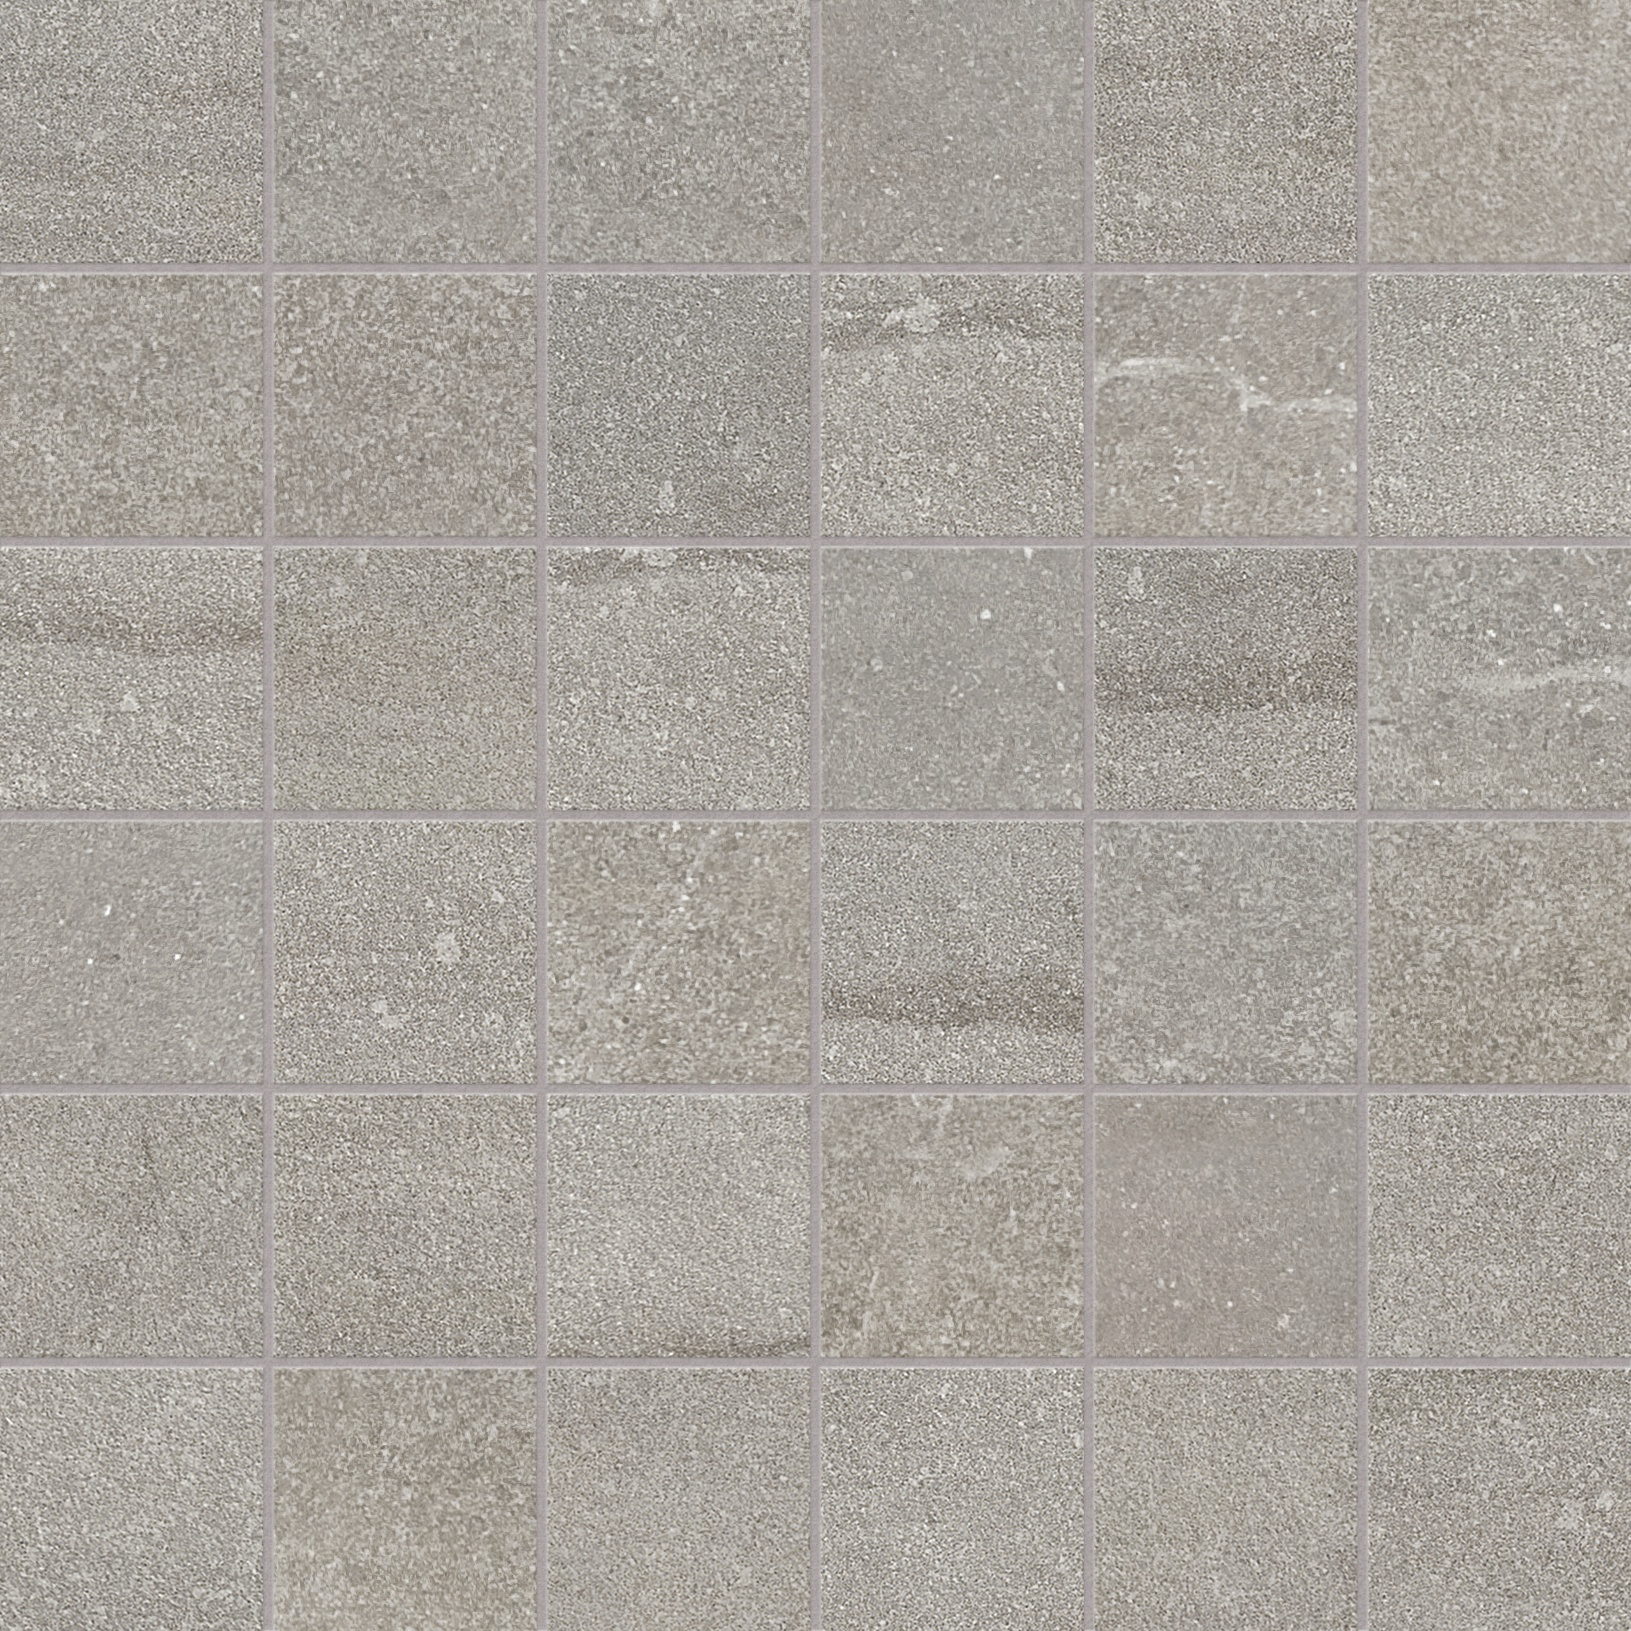 ash straight stack 2x2-inch pattern glazed porcelain mosaic from crux anatolia collection distributed by surface group international matte finish straight edge edge mesh shape